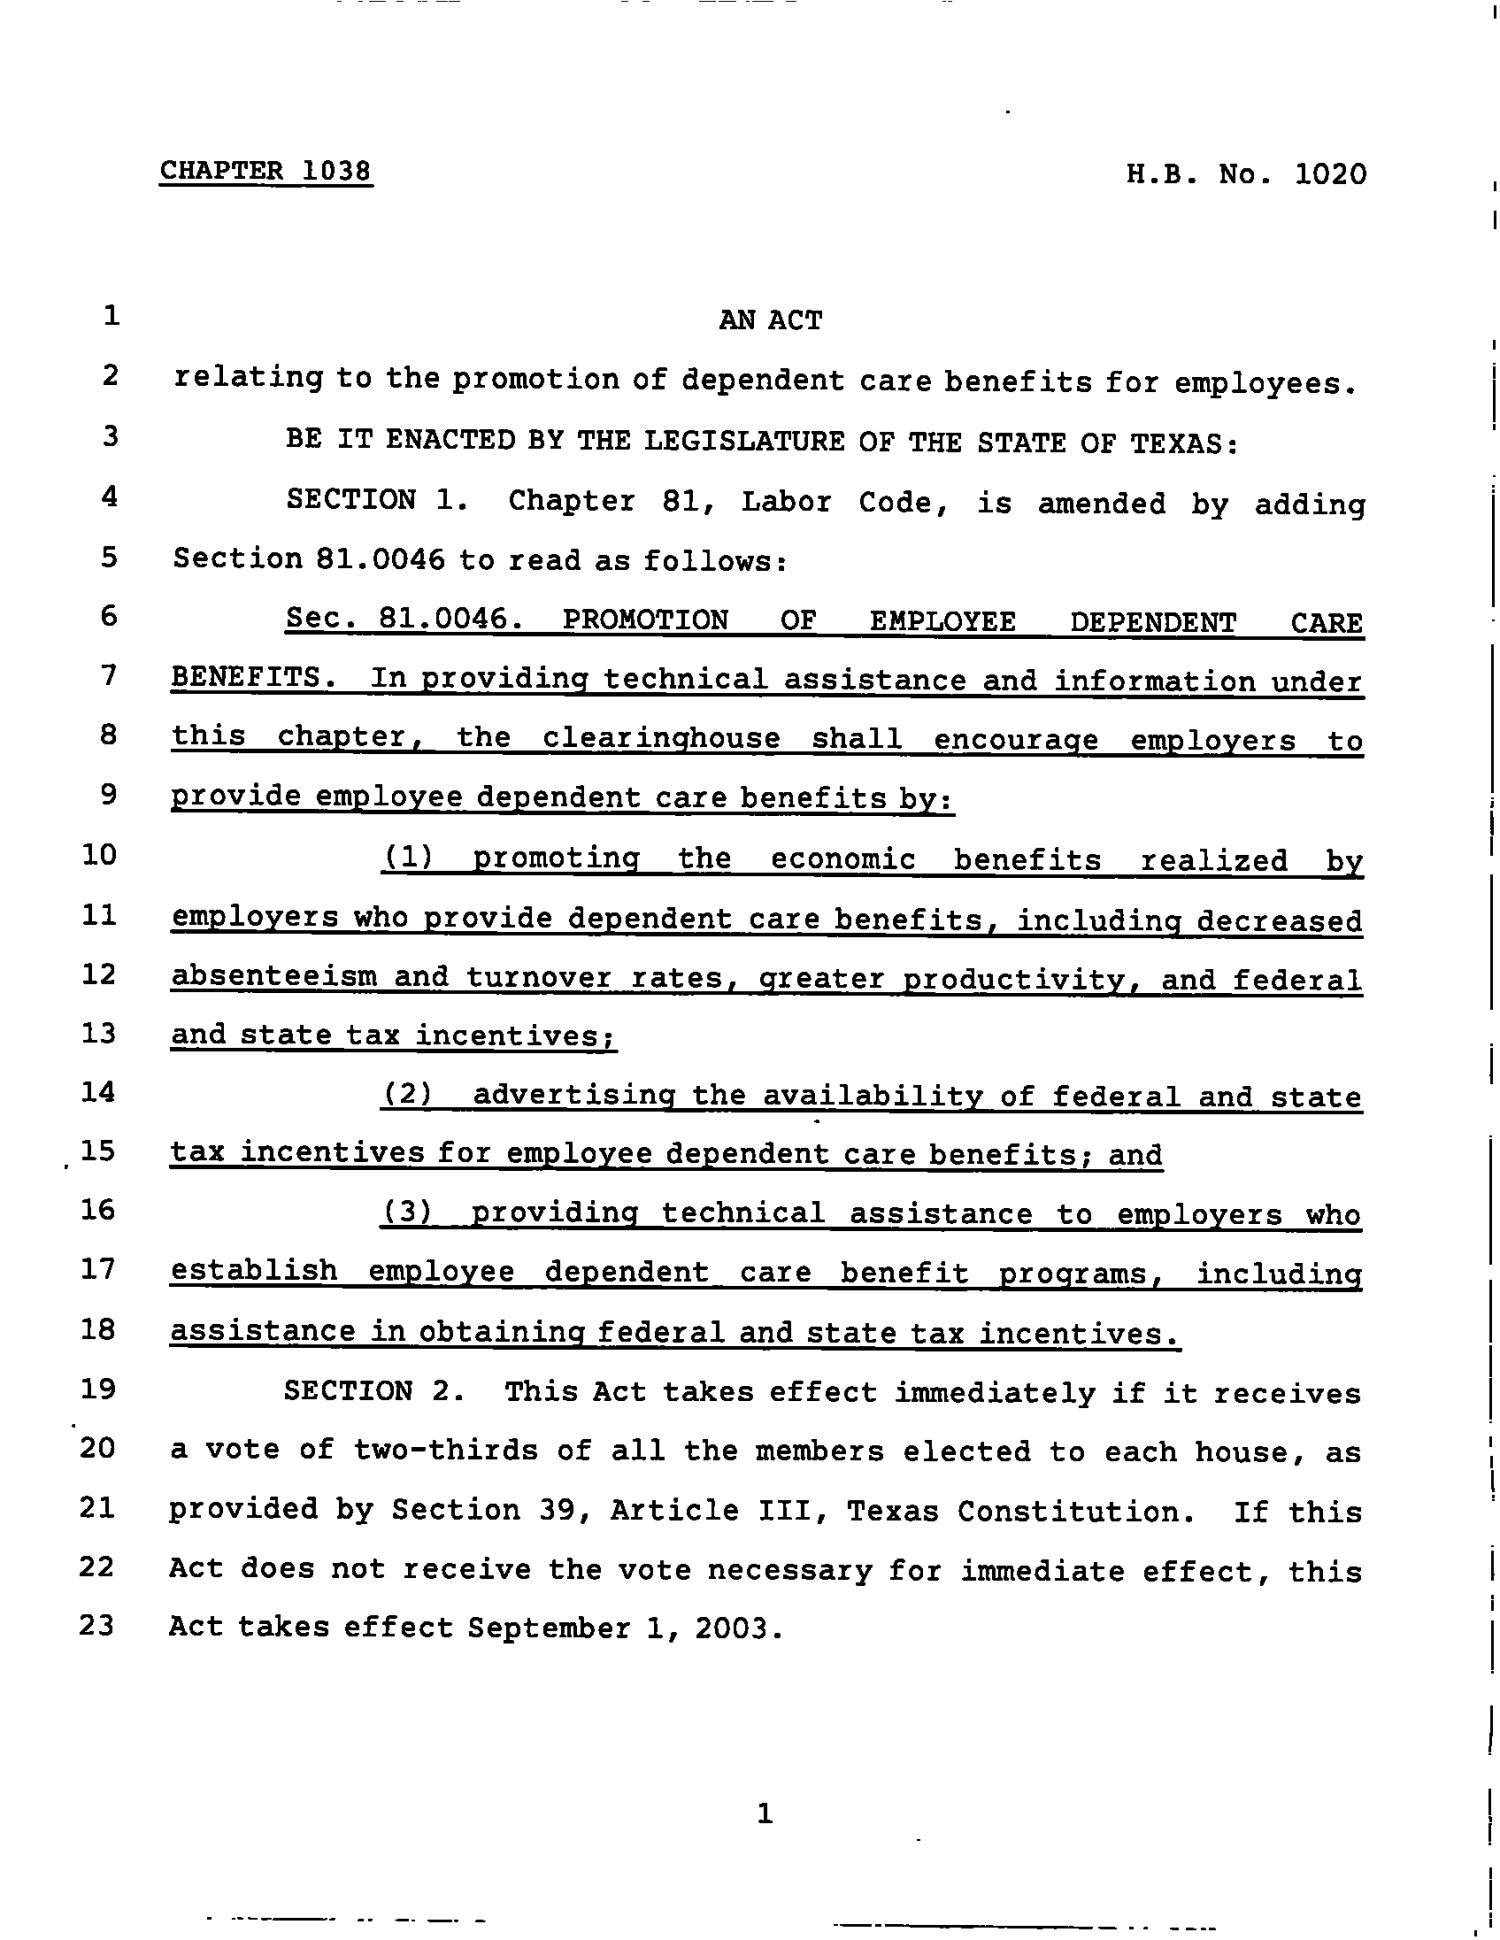 78th Texas Legislature, Regular Session, House Bill 1020, Chapter 1038
                                                
                                                    [Sequence #]: 1 of 2
                                                